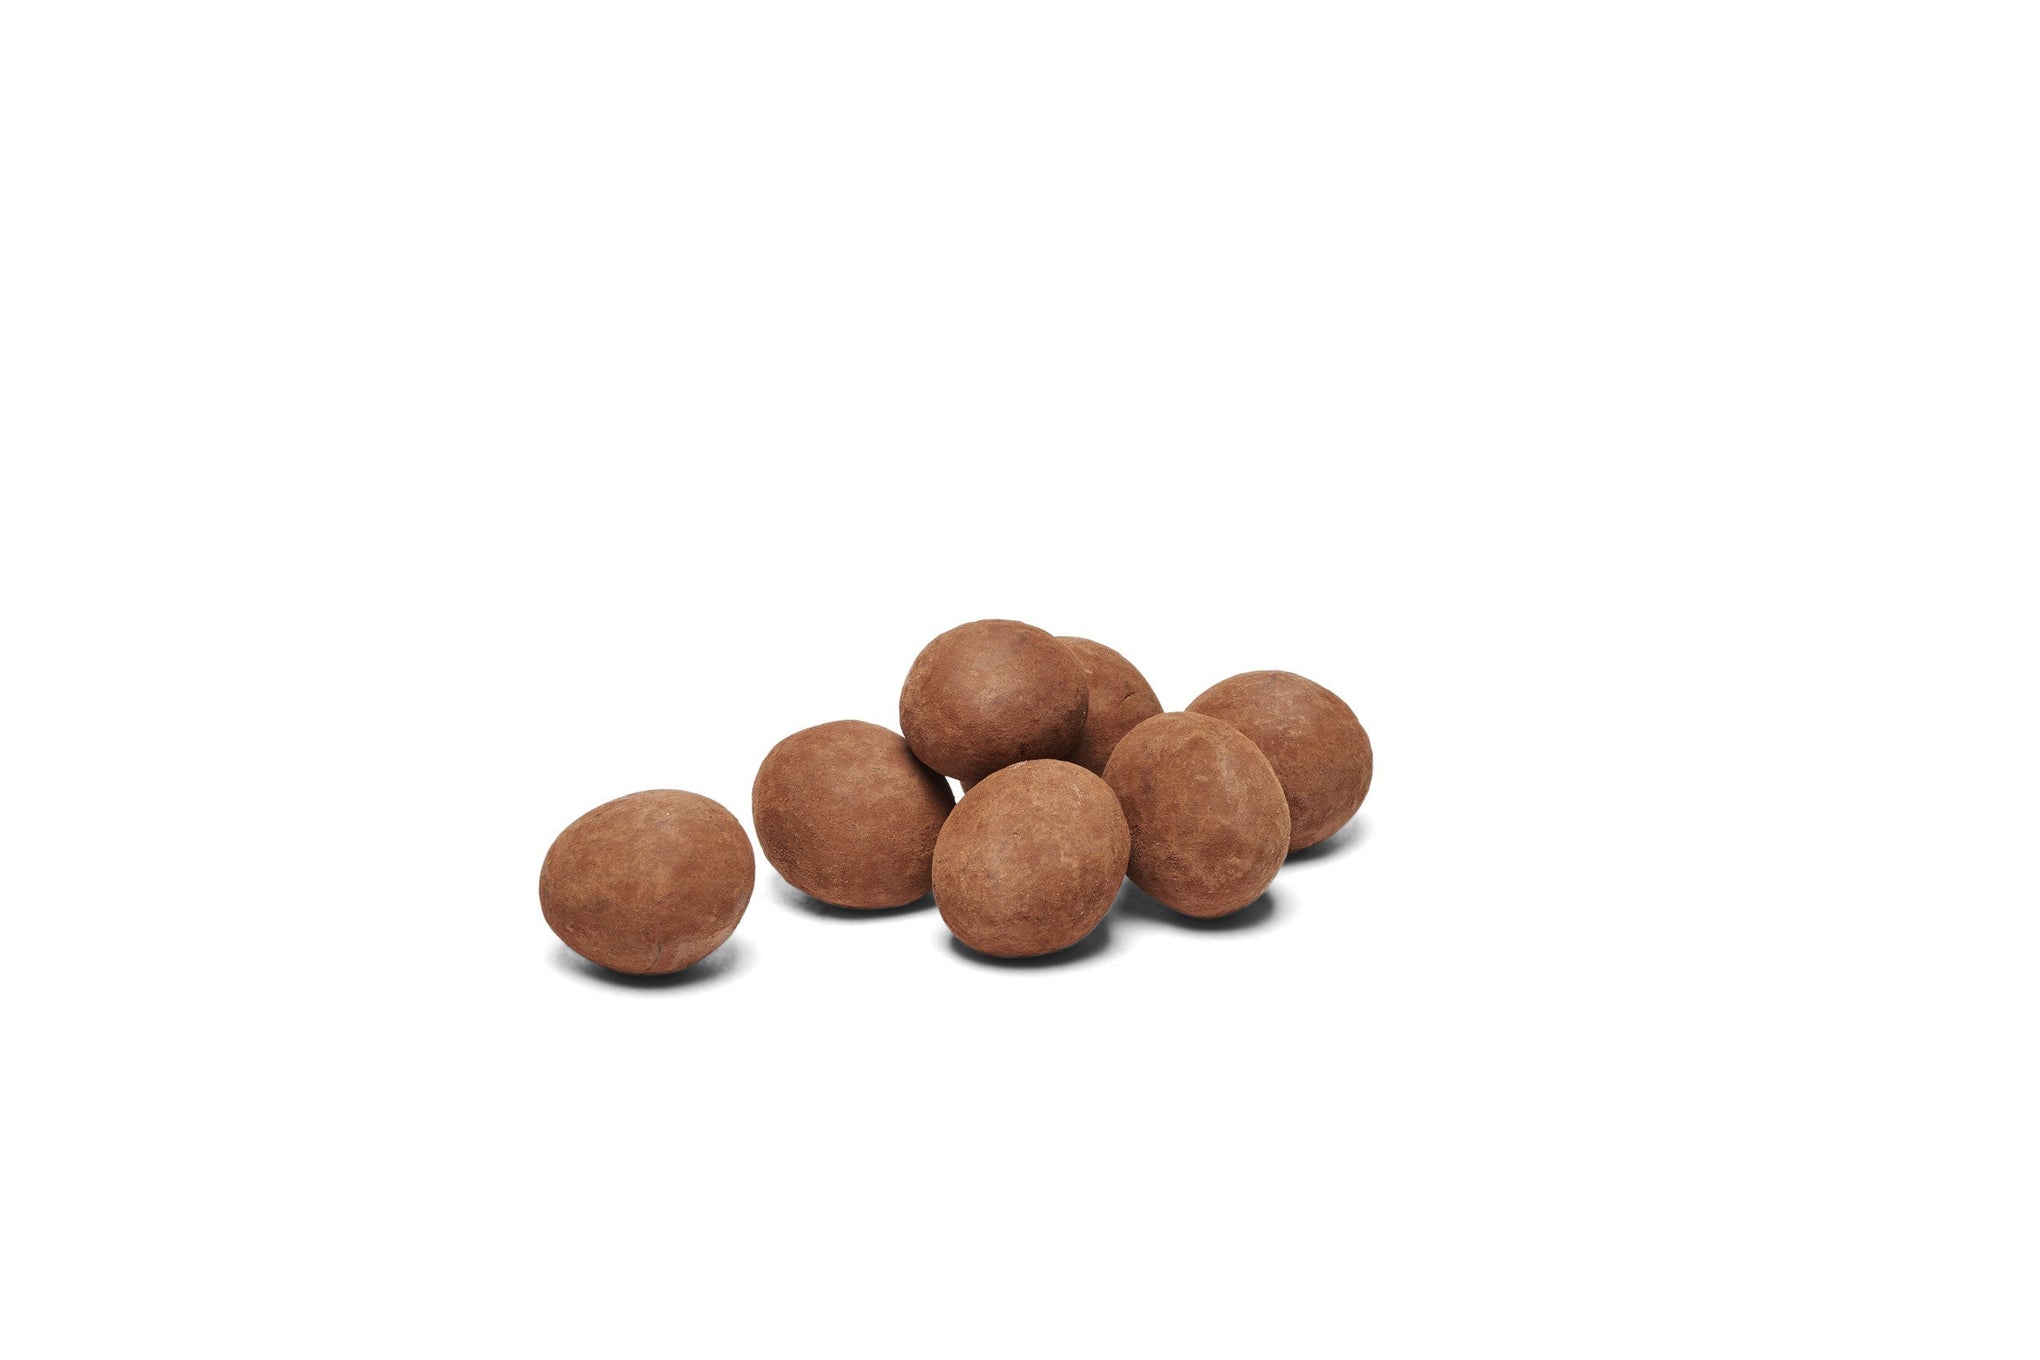 Dusted chocolate macadamias scattered